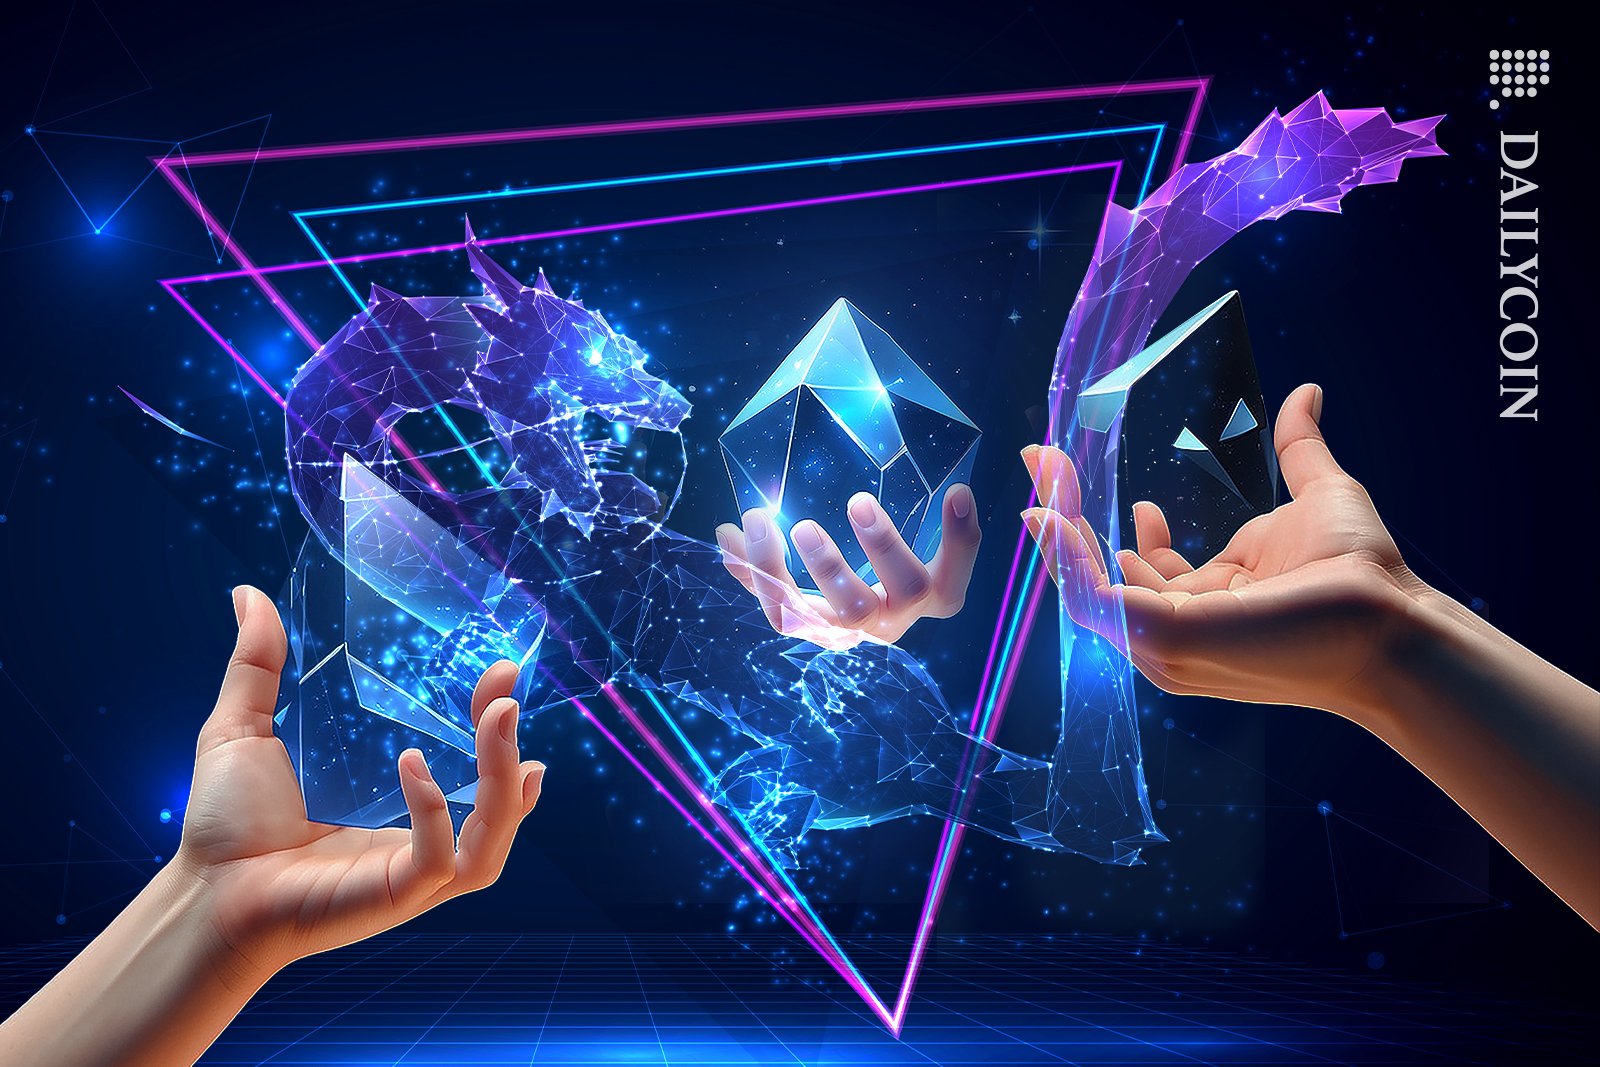 Hands trading blockchain gems with a dragon.